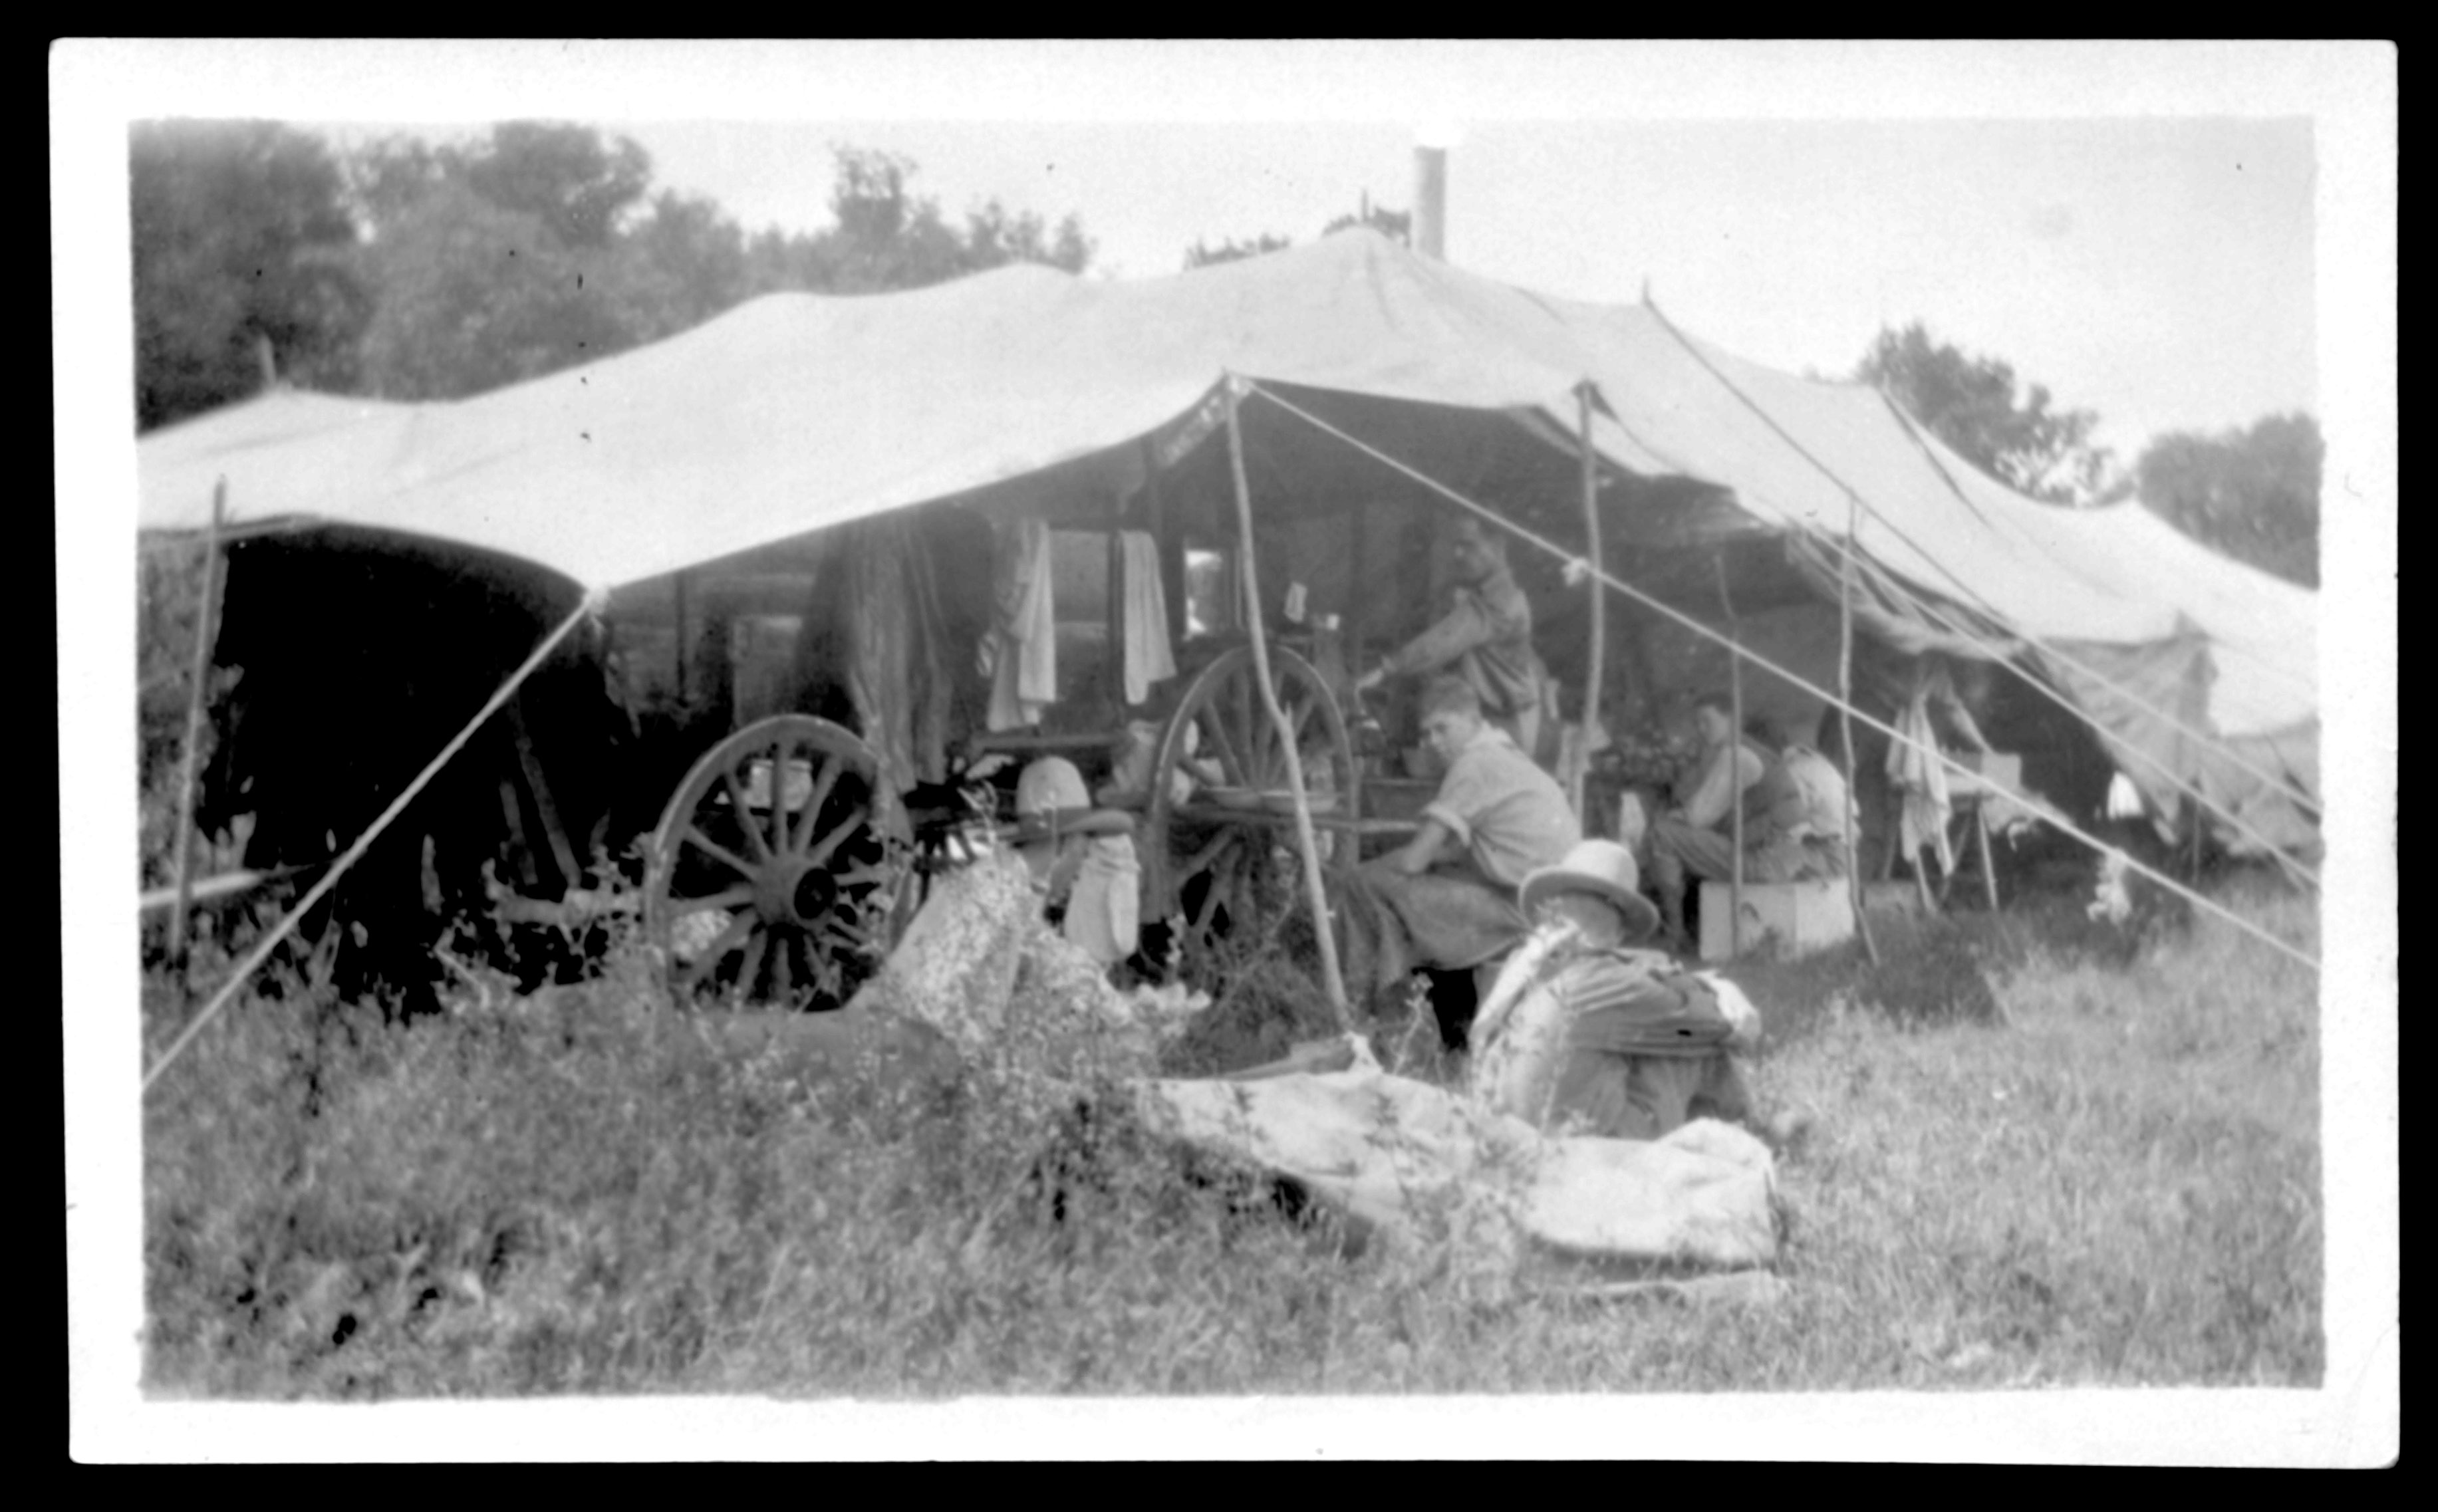 July 1928 Chuck Wagon and cook's tent. Lodge Grass